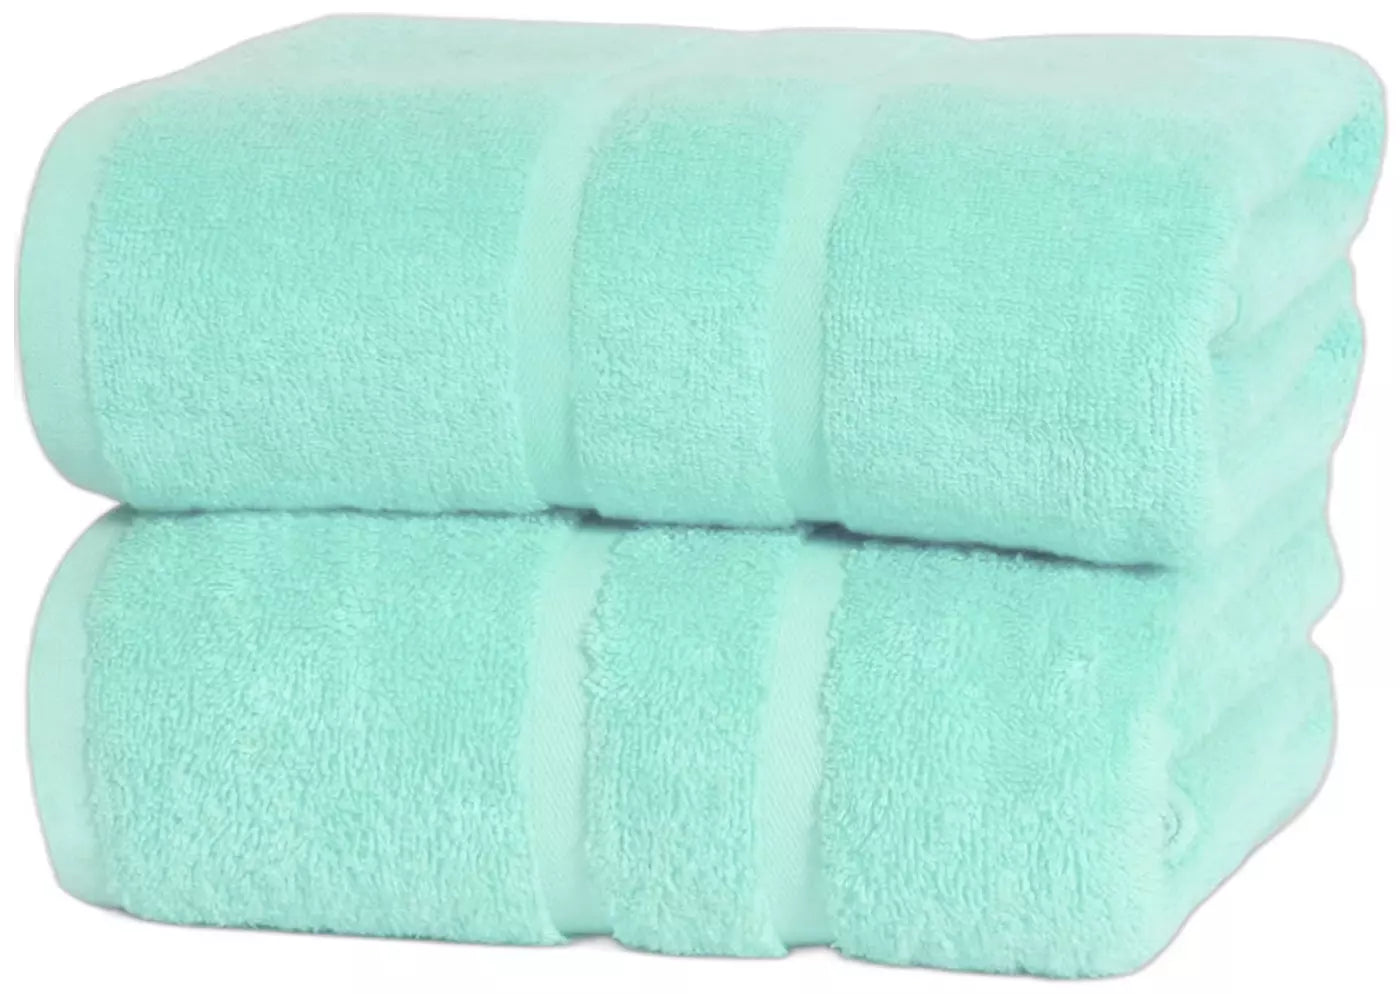 2x Bath Sheets Soft 100% Egyptian Cotton Extra Large 600-GSM Towels 100 x 200 cm